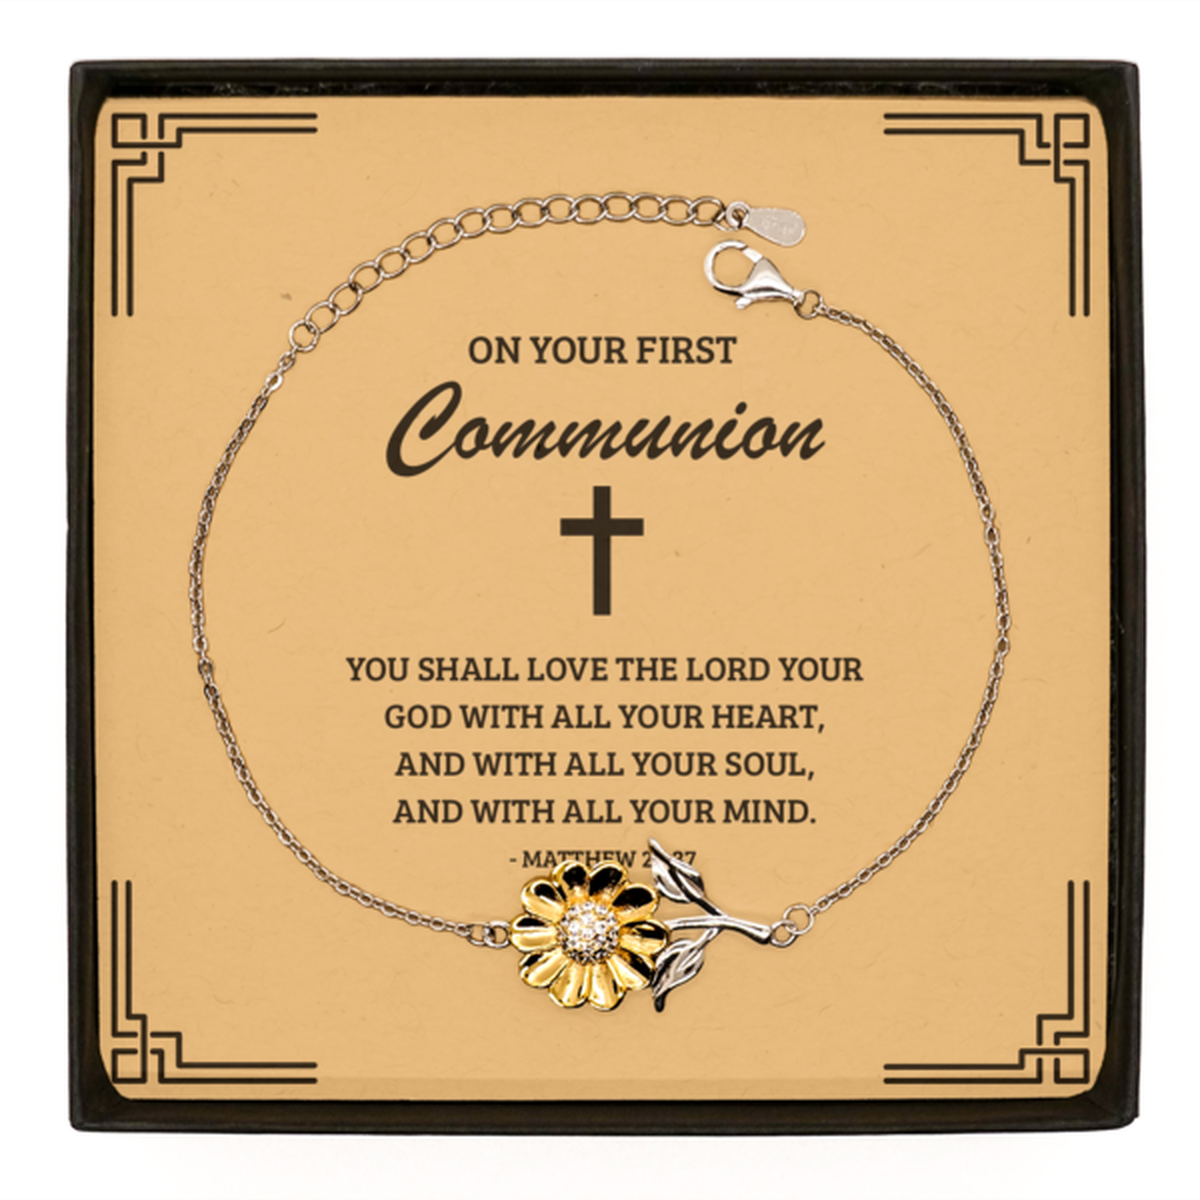 First Communion Gifts for Teenage Girls, You shall love the Lord your God, .925 Sterling Silver Sunflower Bracelet with Bible Verse Message Card, Religious Catholic Bracelet for Daughter, Granddaughter